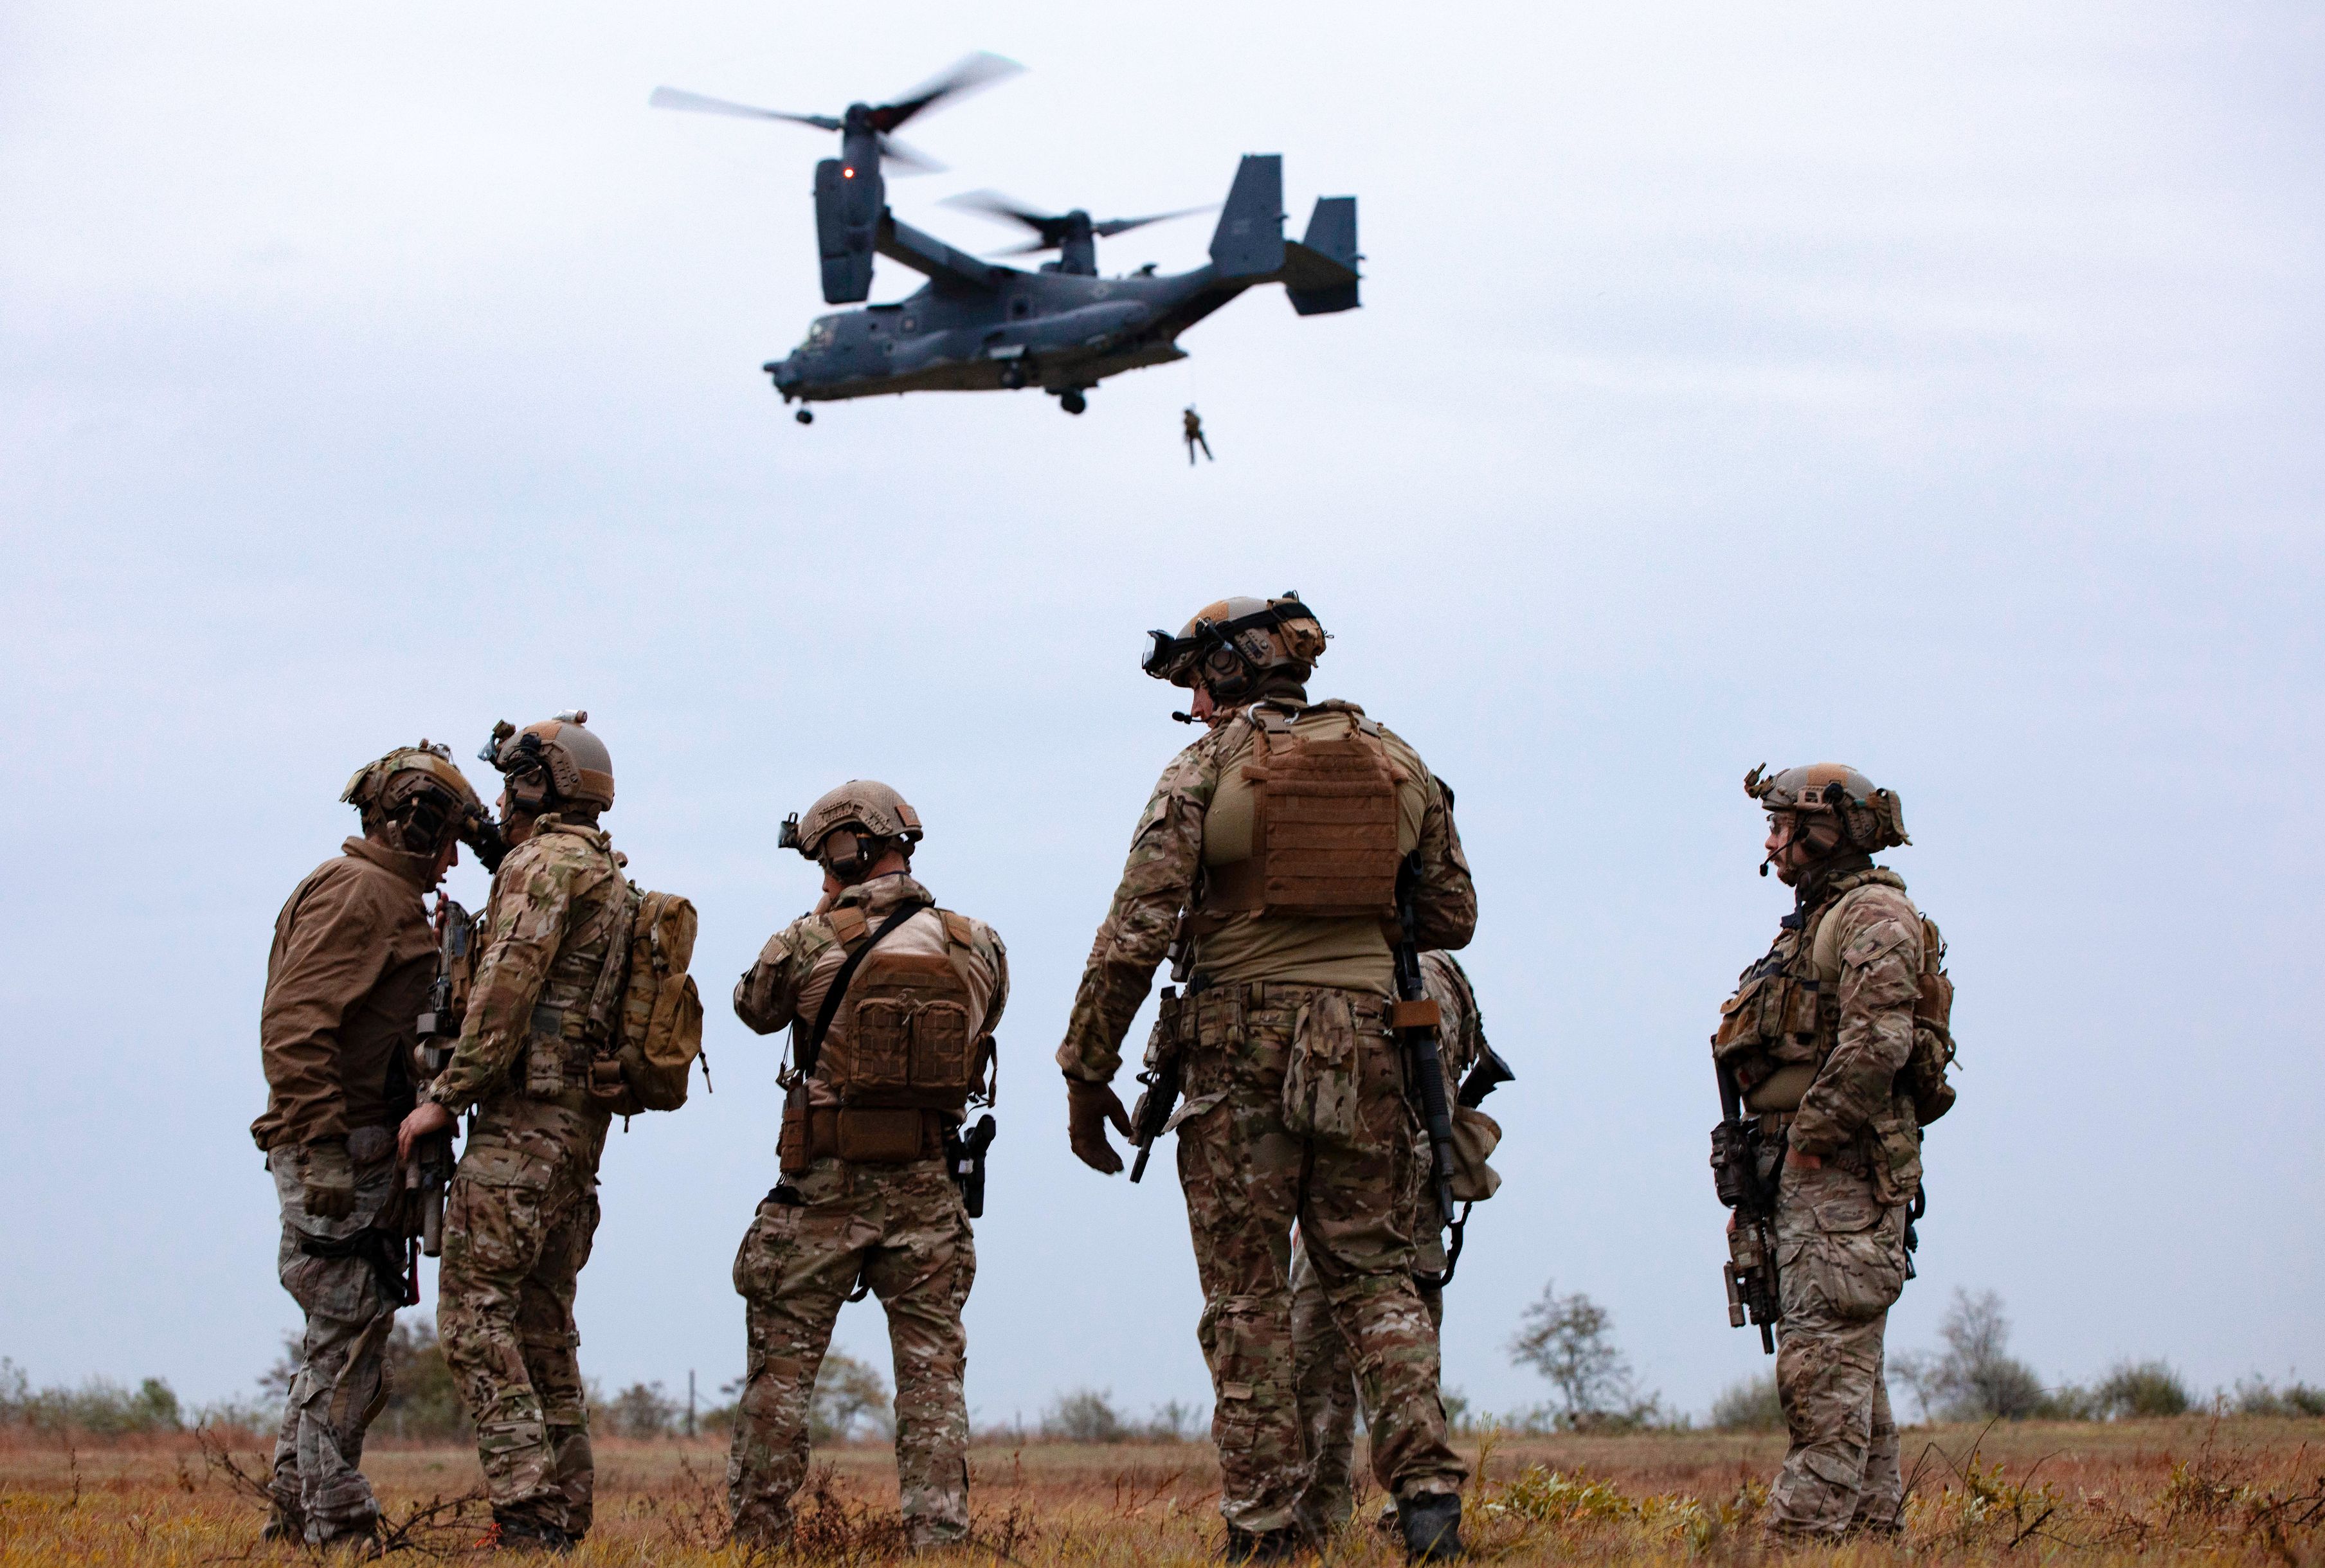 U.S. Army Special Forces Soldiers assigned to the 19th Special Forces Group (Airborne) prepare to board the CV-22B Osprey aircraft operated by U.S. Airmen assigned to the 352d Special Operations Wing for additional infil training in Szolnok, Hungary October 28, 2019.